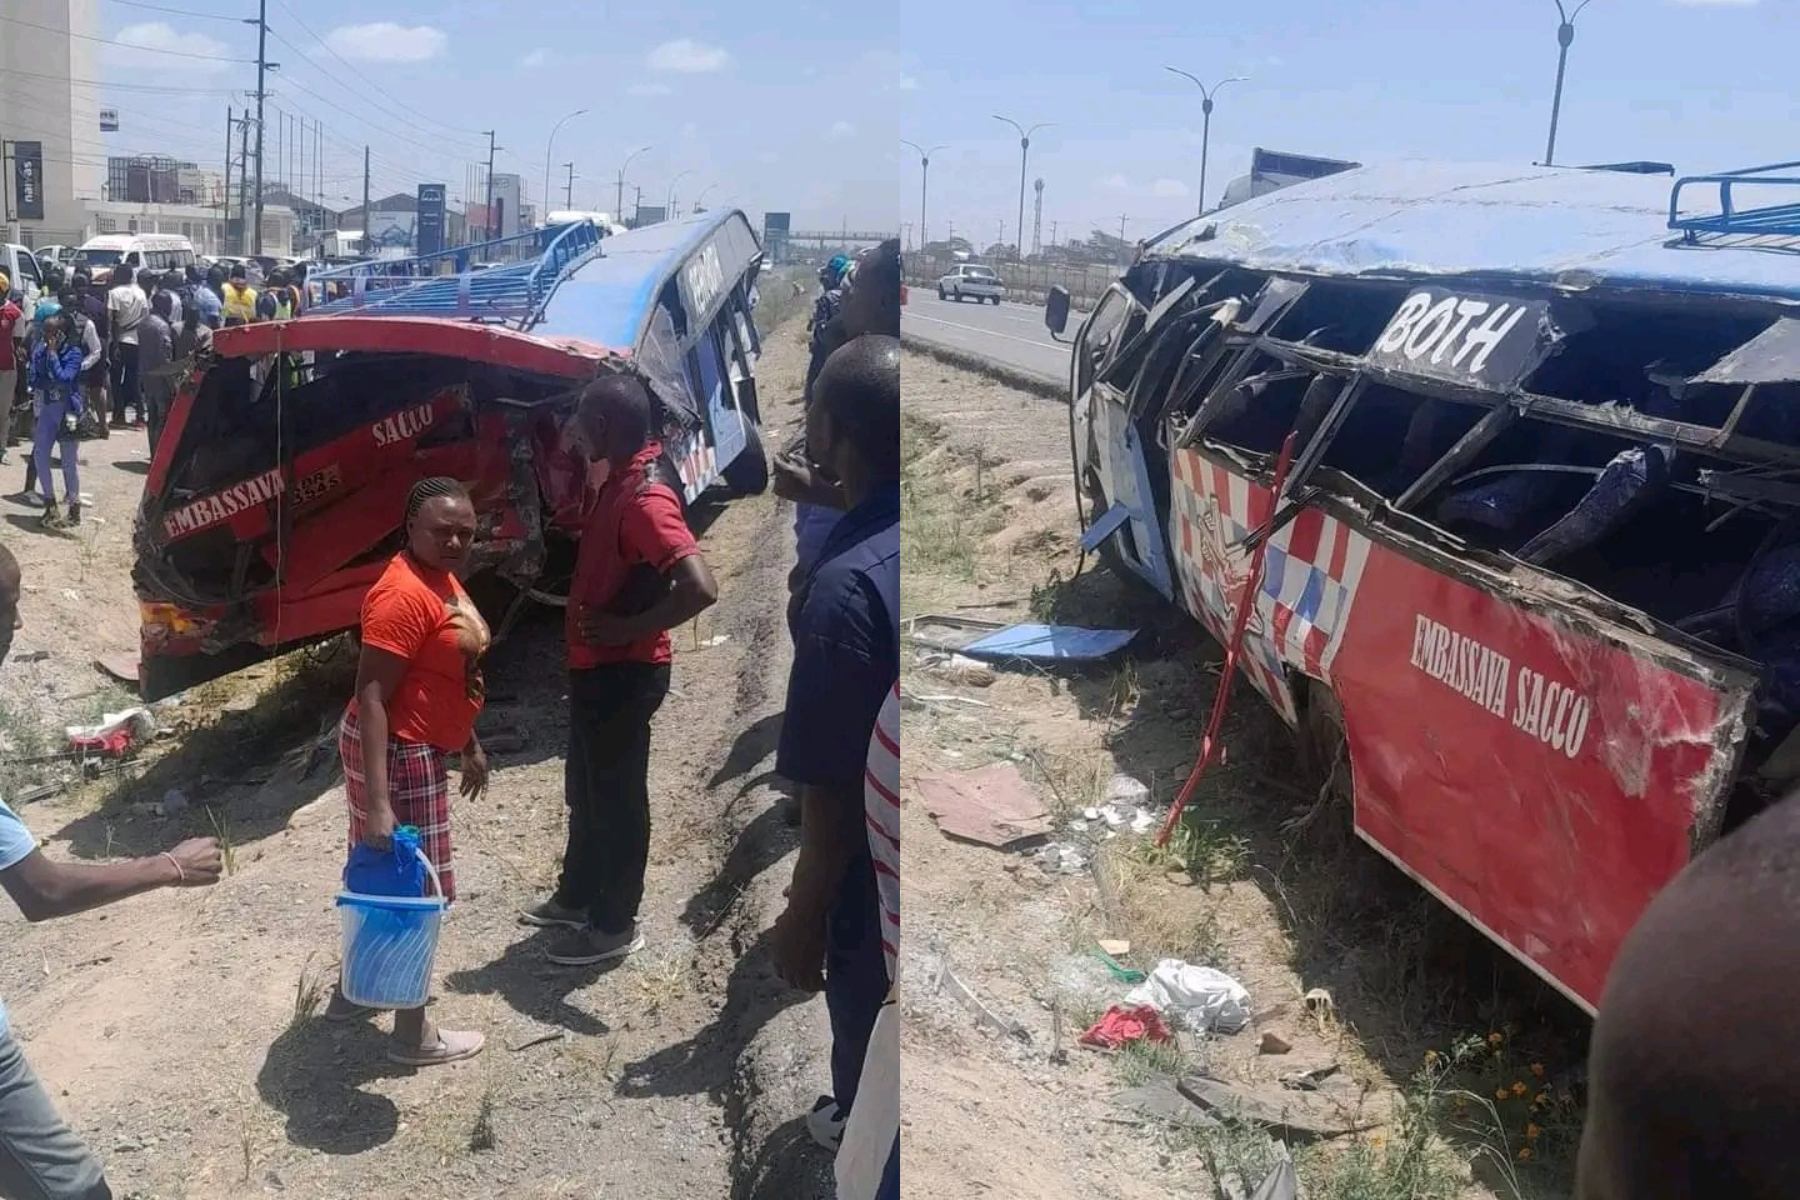 Photocollage of an Embassava bus involved in a road accident on Monday February 12.